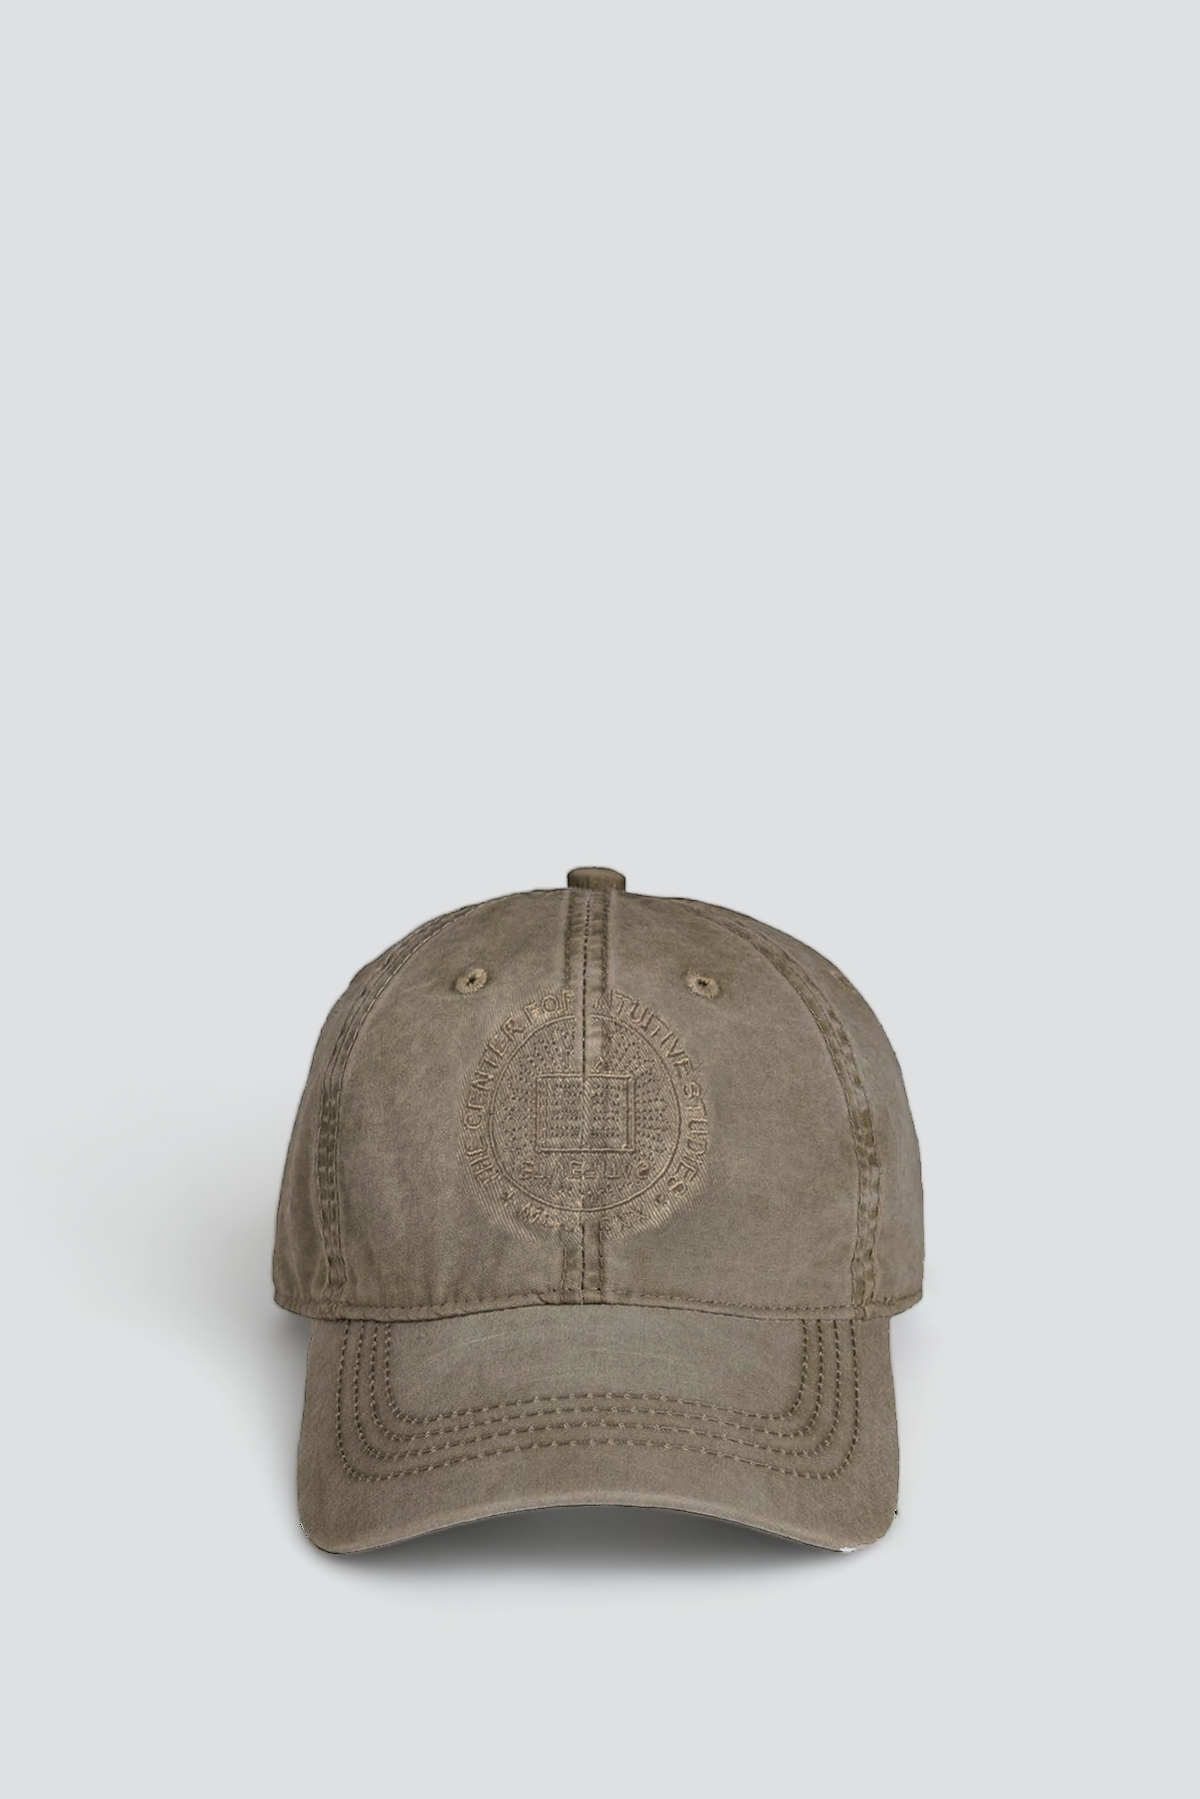 The Center for Intuitive Studies Circle Logo Hat - Washed Khaki